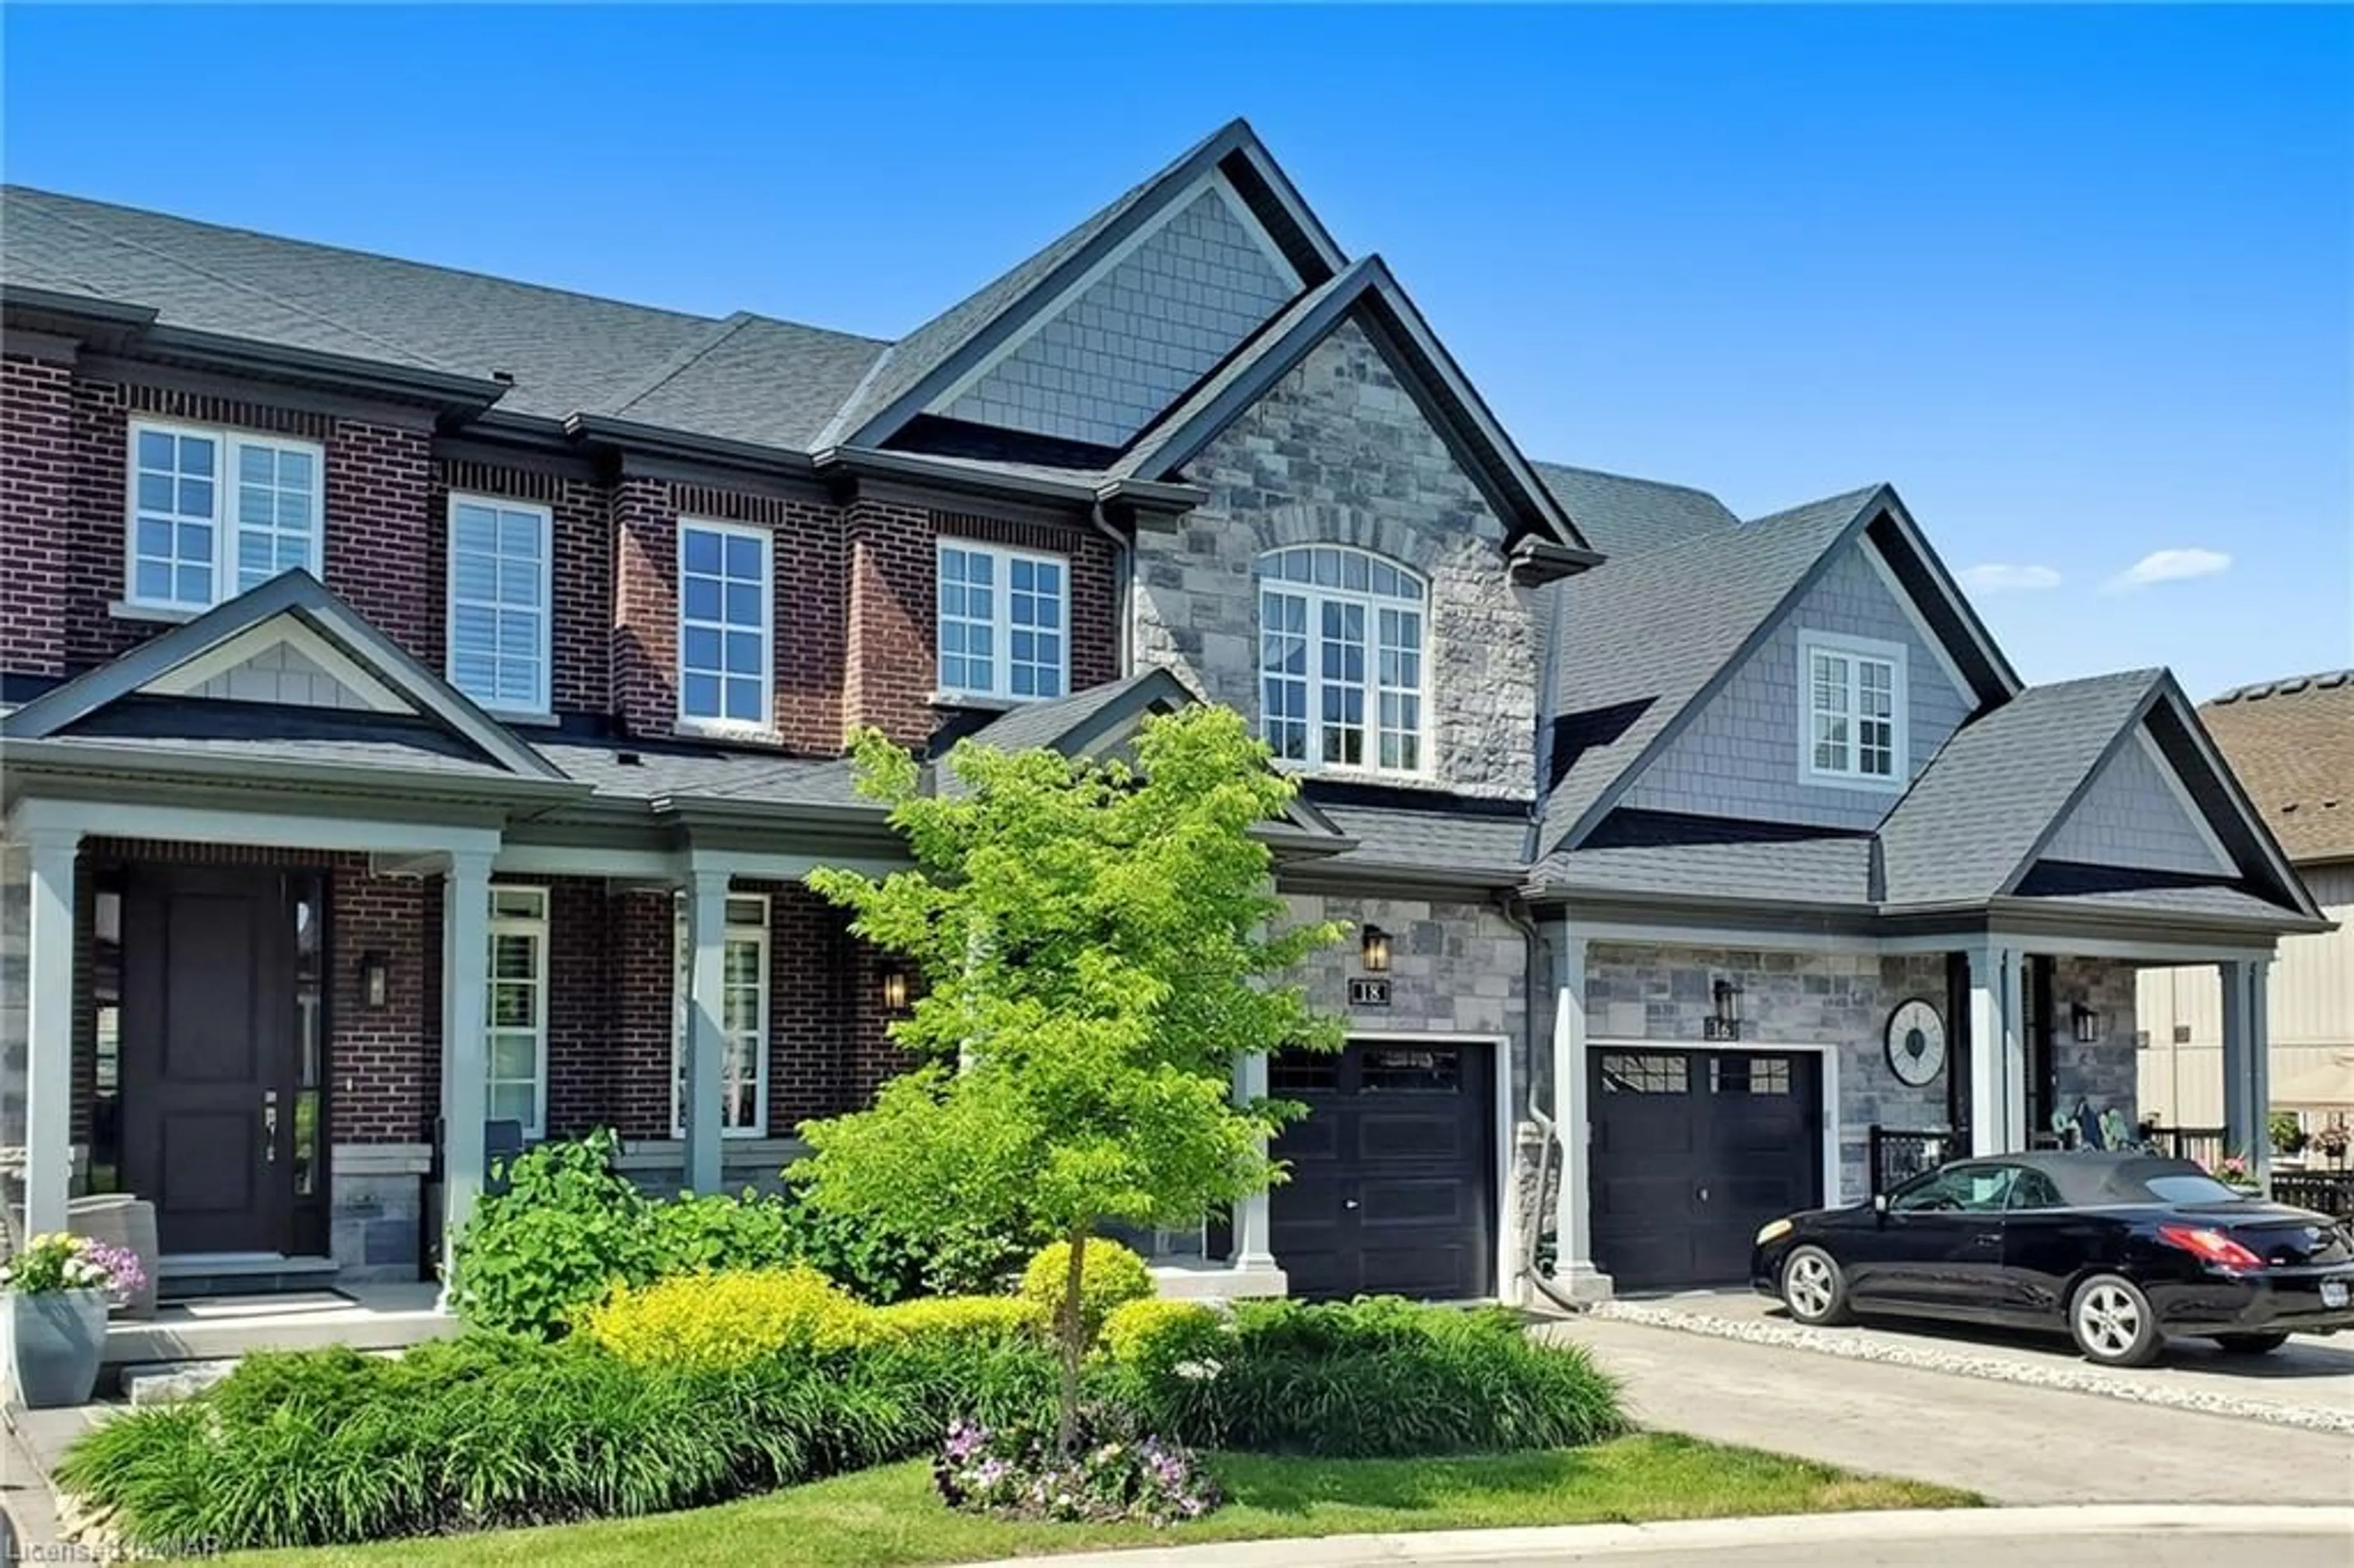 Home with brick exterior material for 18 Windsor Cir, Niagara-on-the-Lake Ontario L0S 1J0